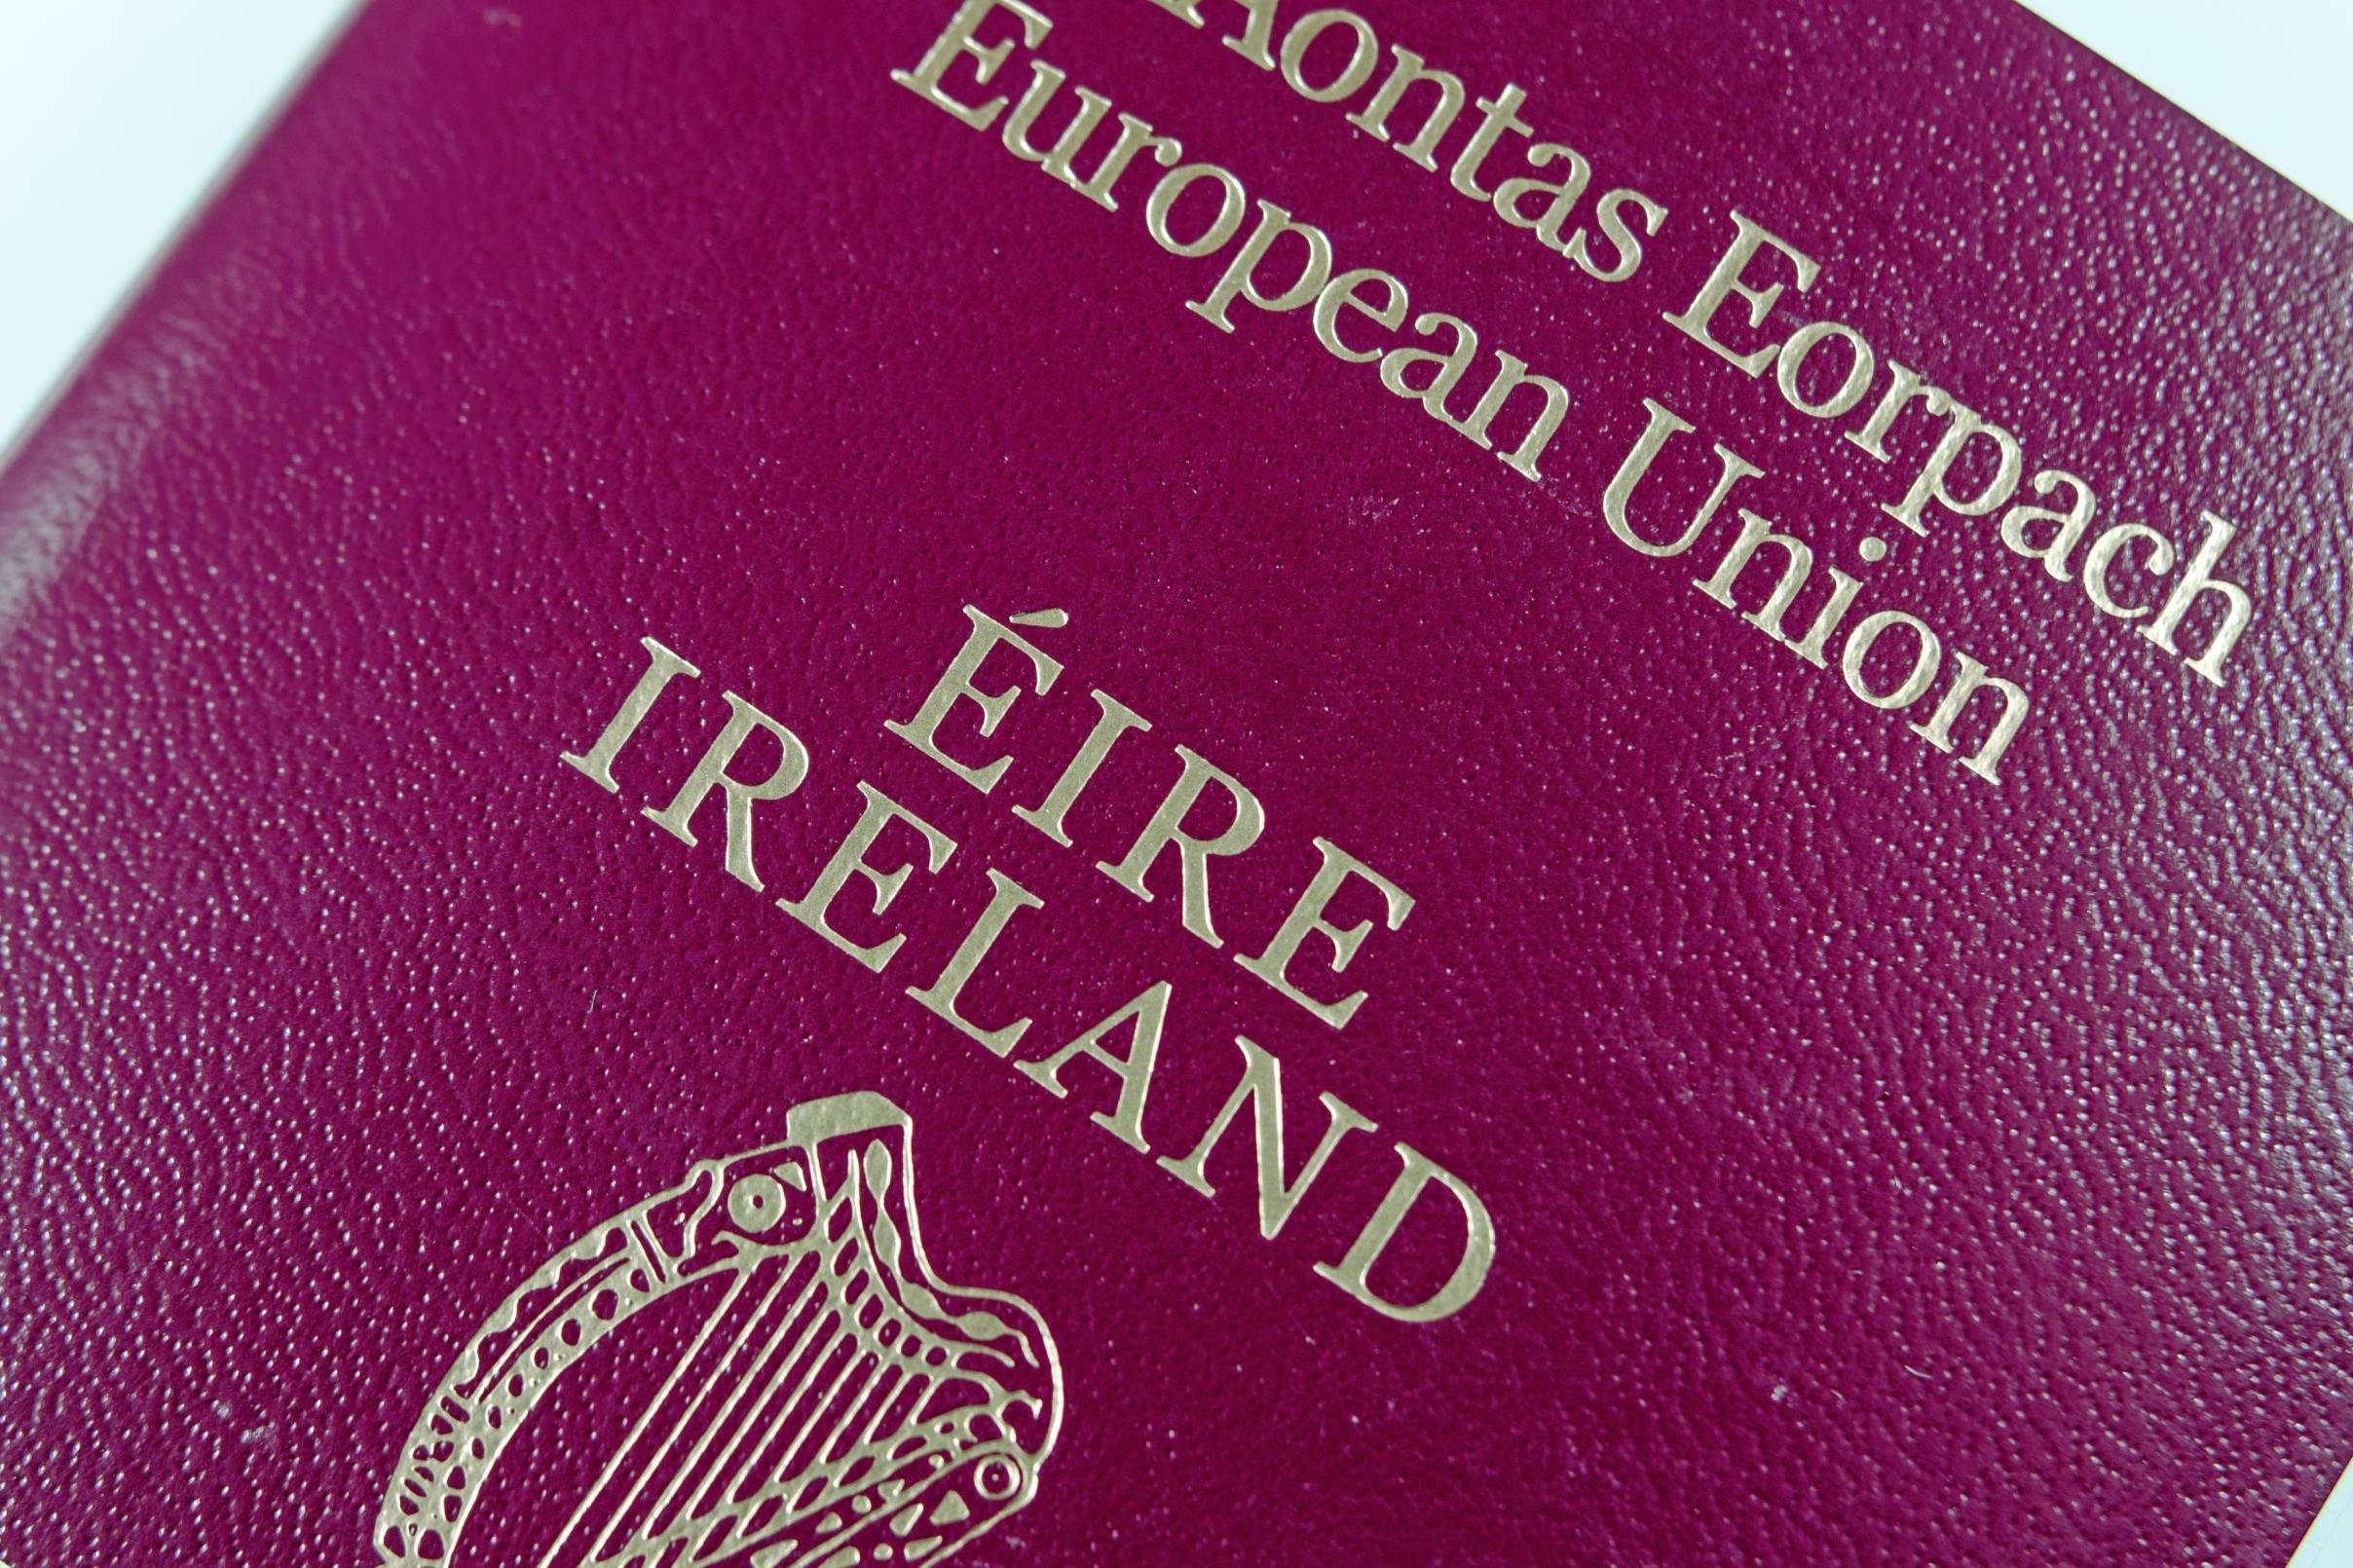 Almost One Million Irish Passports Were Issued In 2019 Astons 1504